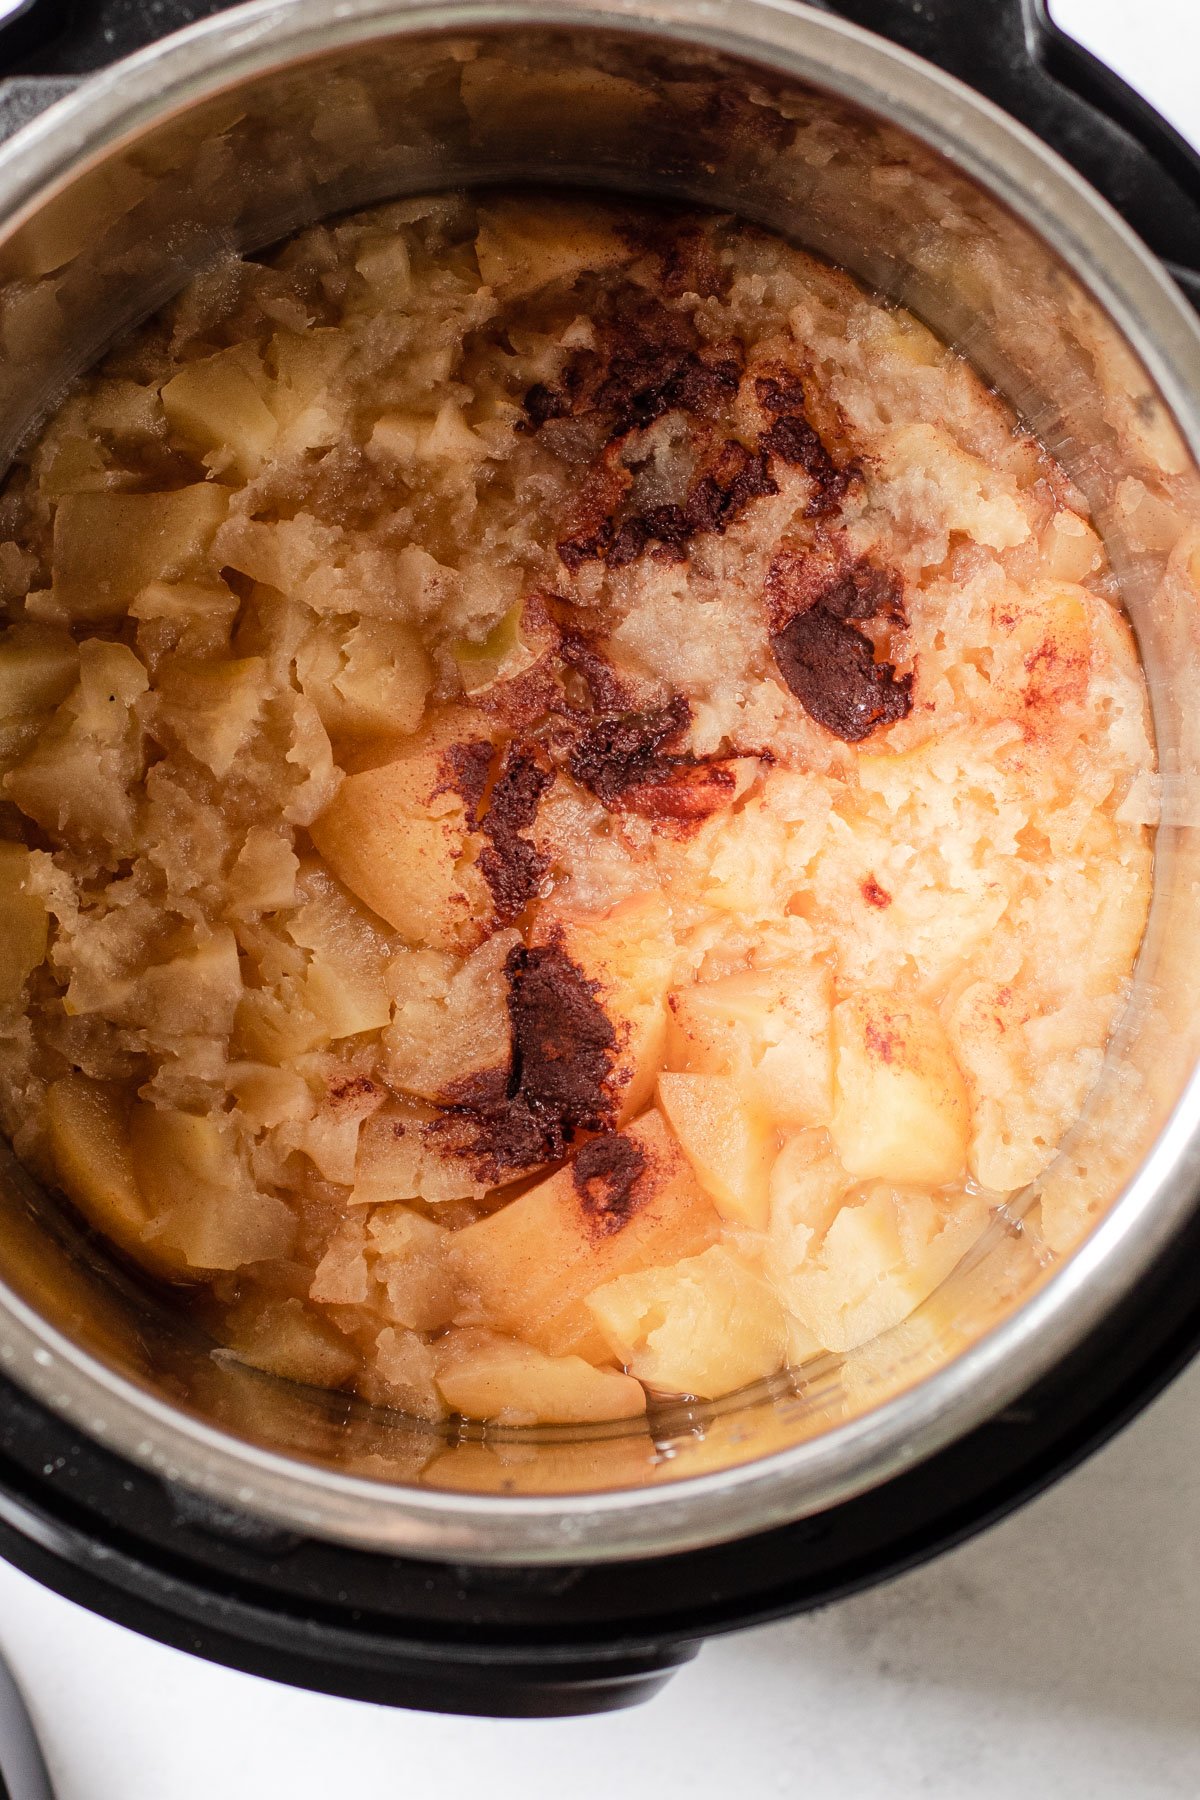 Cooked apples in an instant pot to make apple sauce.